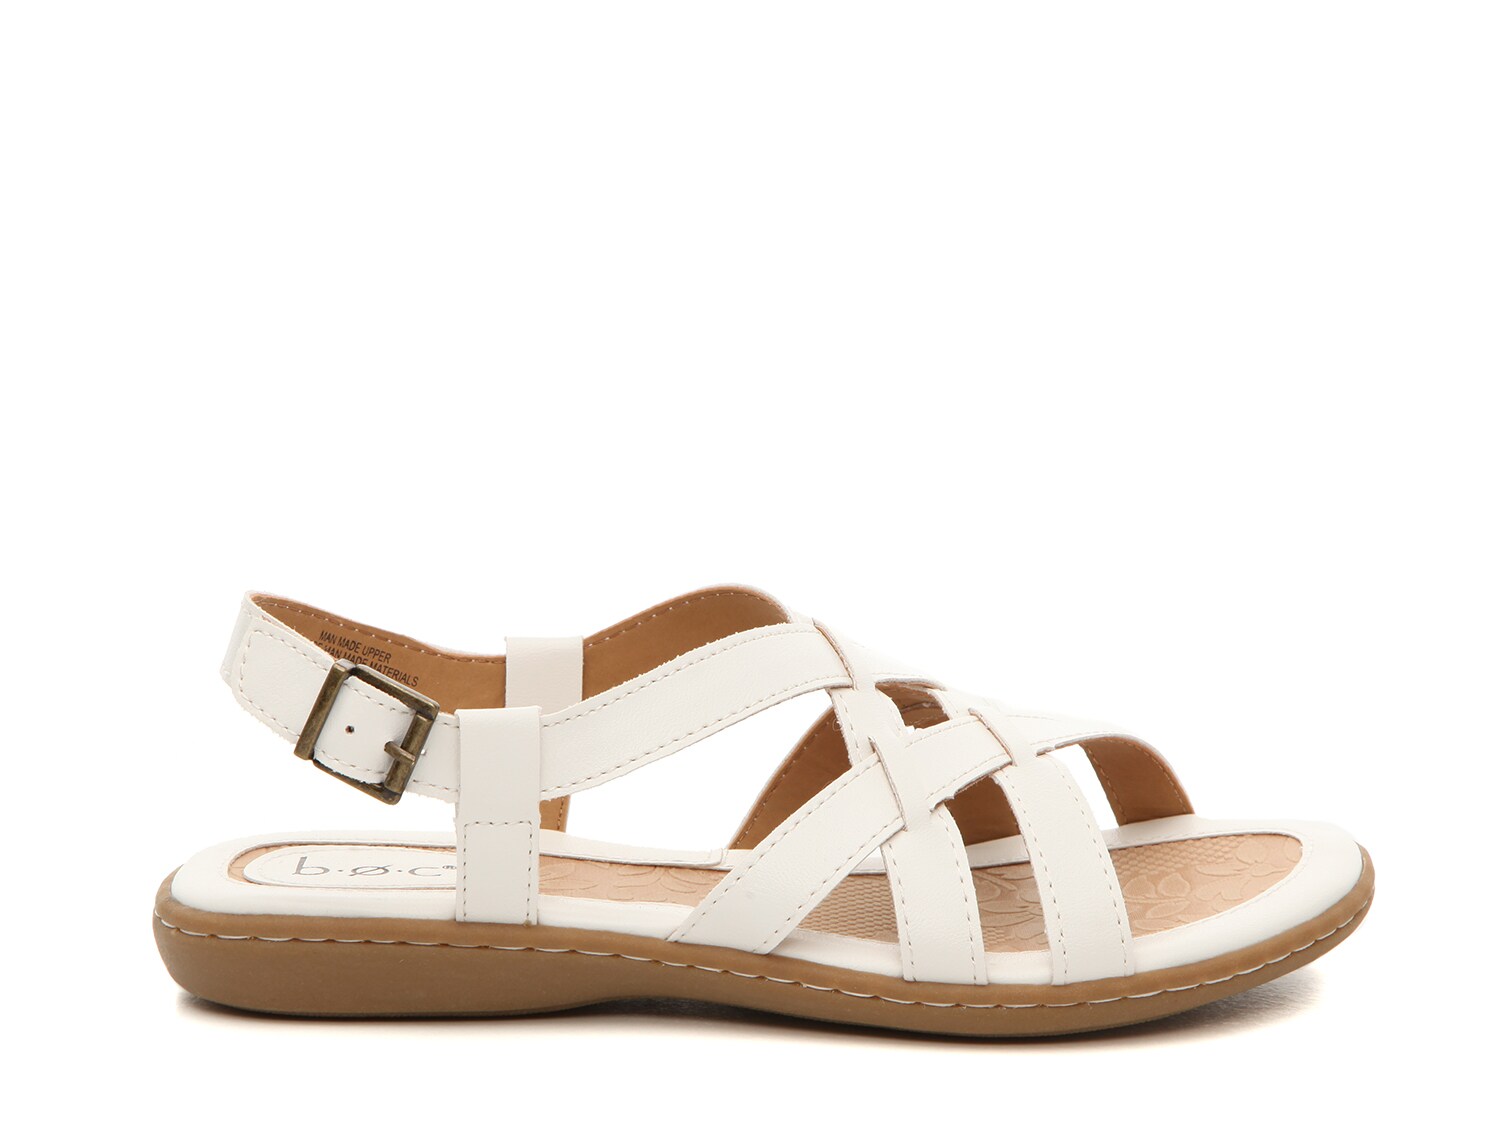 extra wide fit wedge sandals